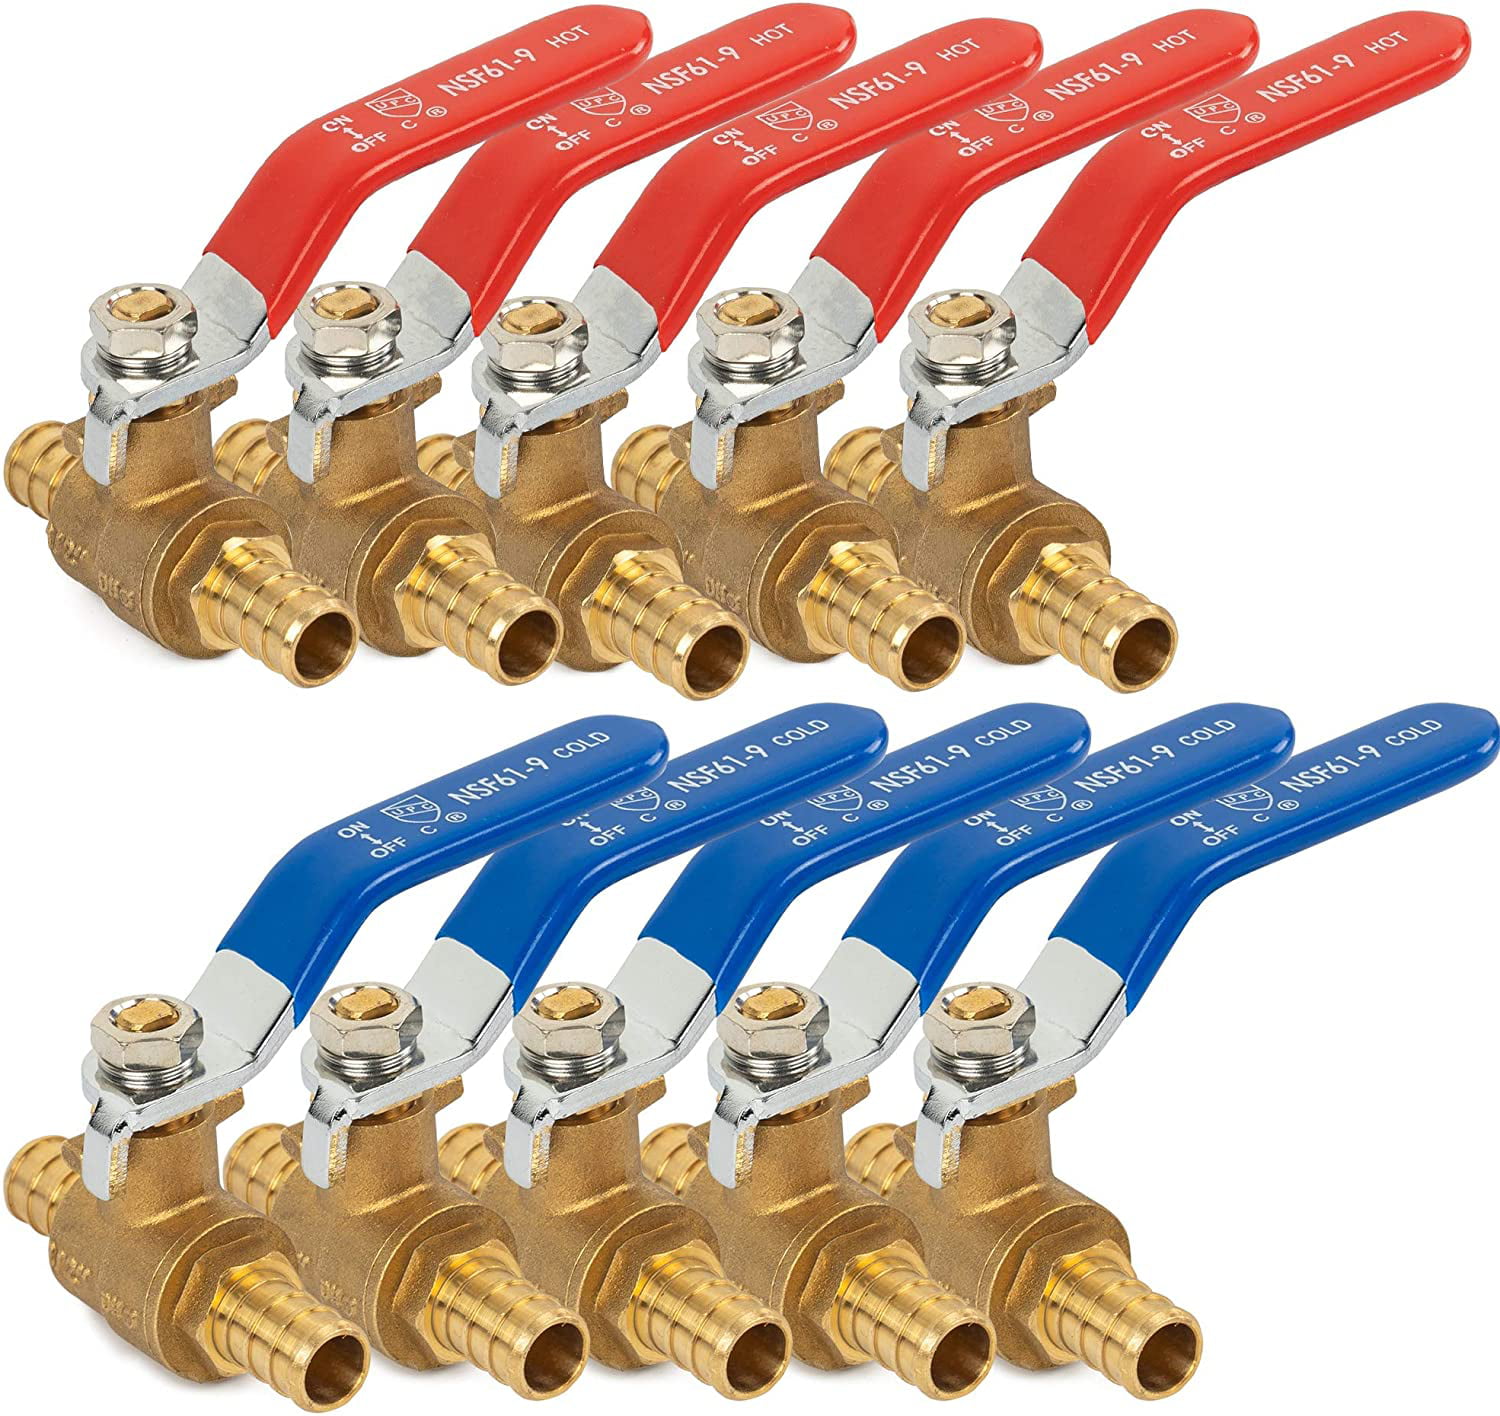 FULL PORT HOT AND COLD LEAD FREE BRASS 10 PIECES 1/2" PEX SHUT OFF BALL VALVE 